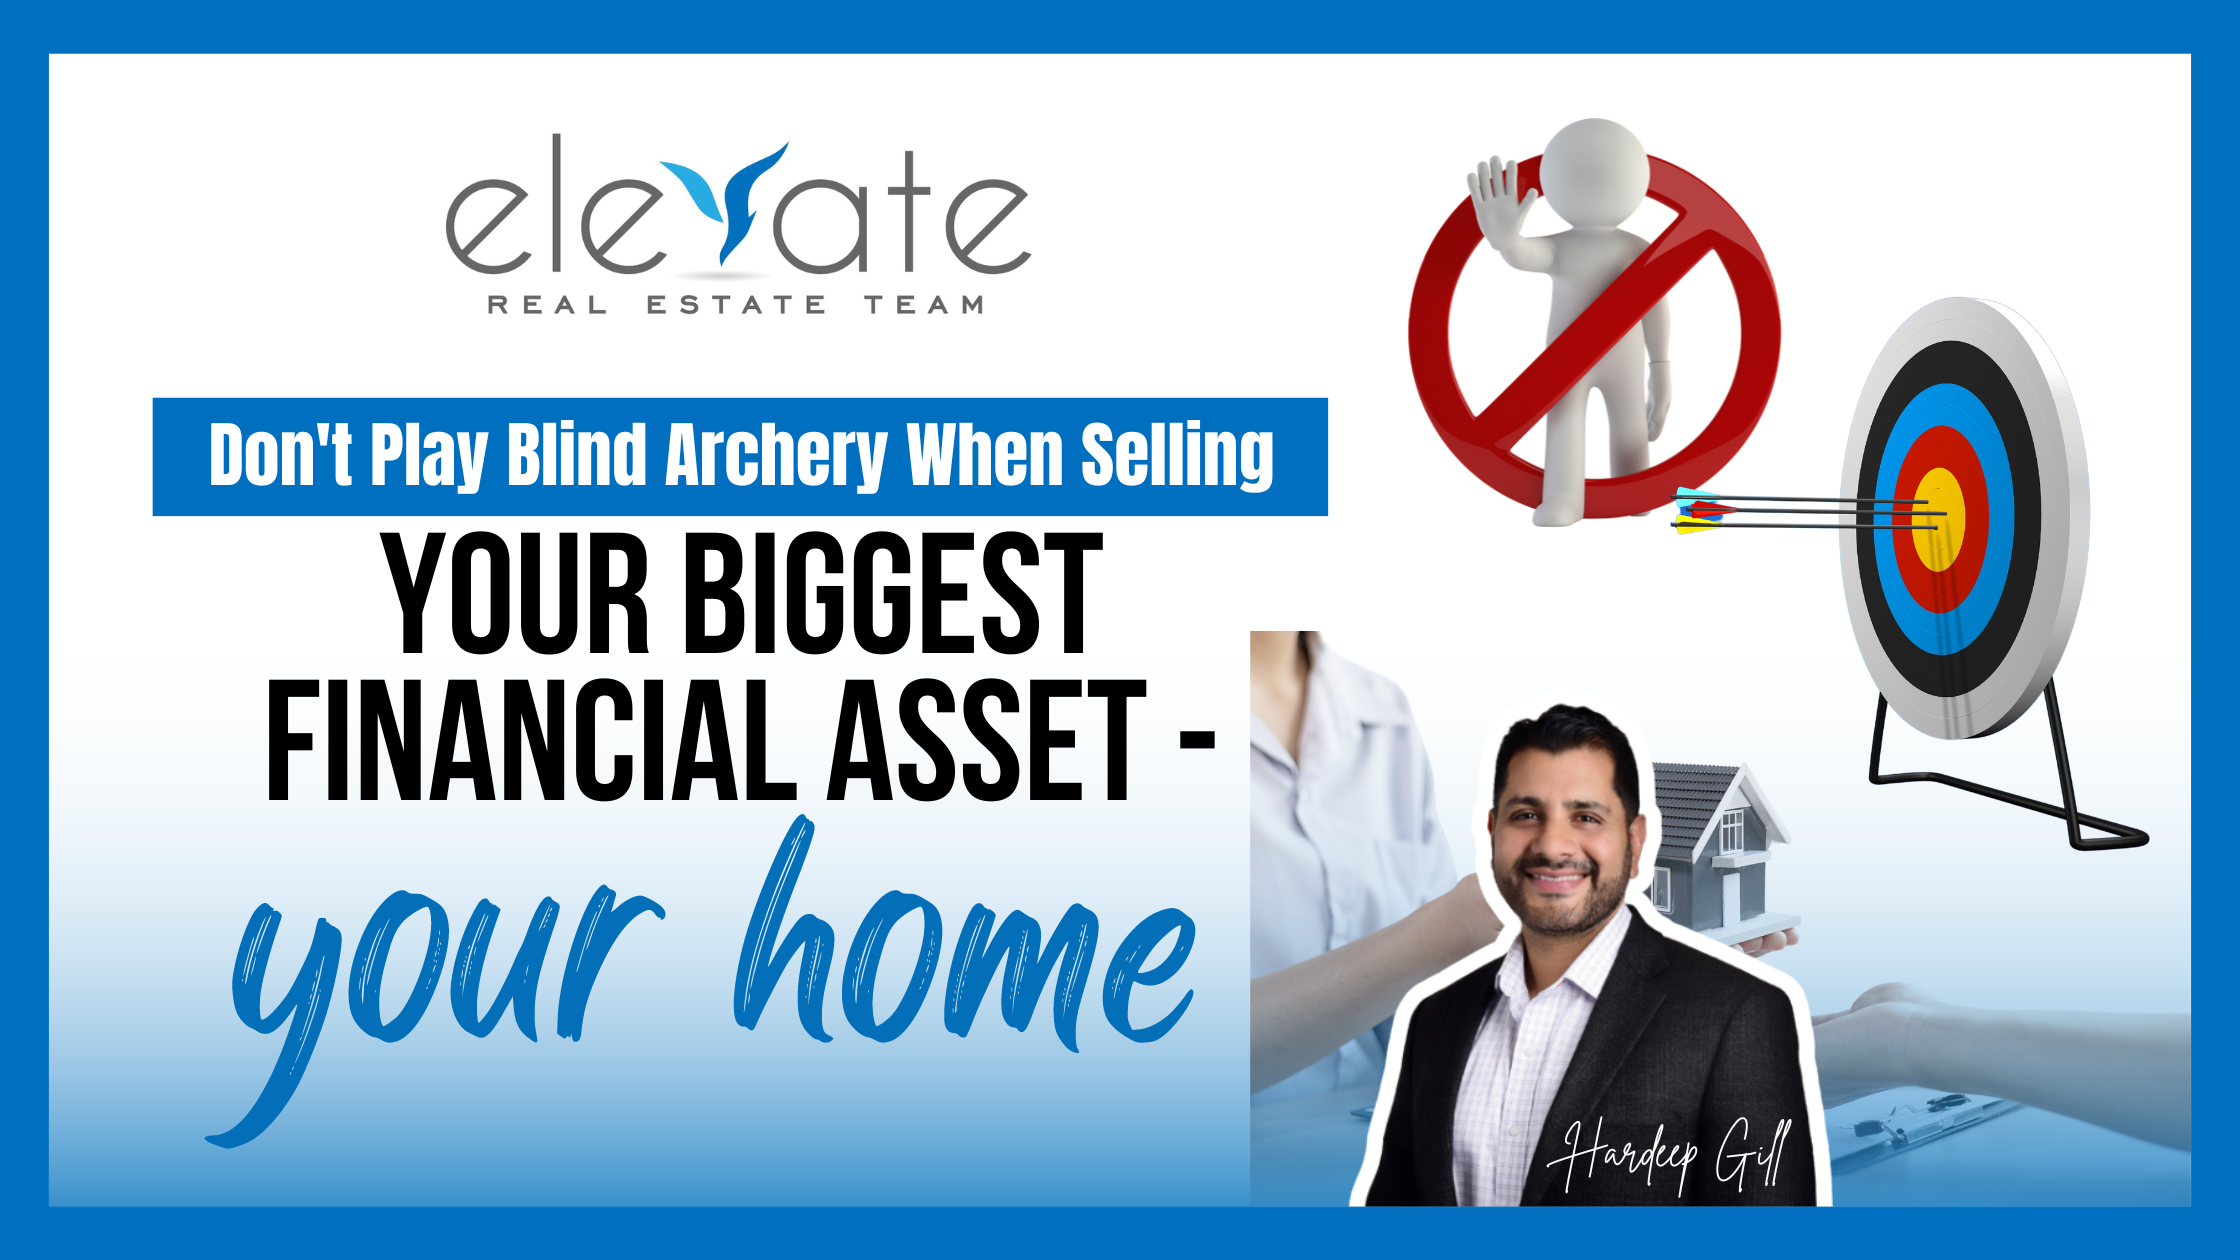 Don't Play Blind Archery When Selling Your Biggest Financial Asset - Your Home